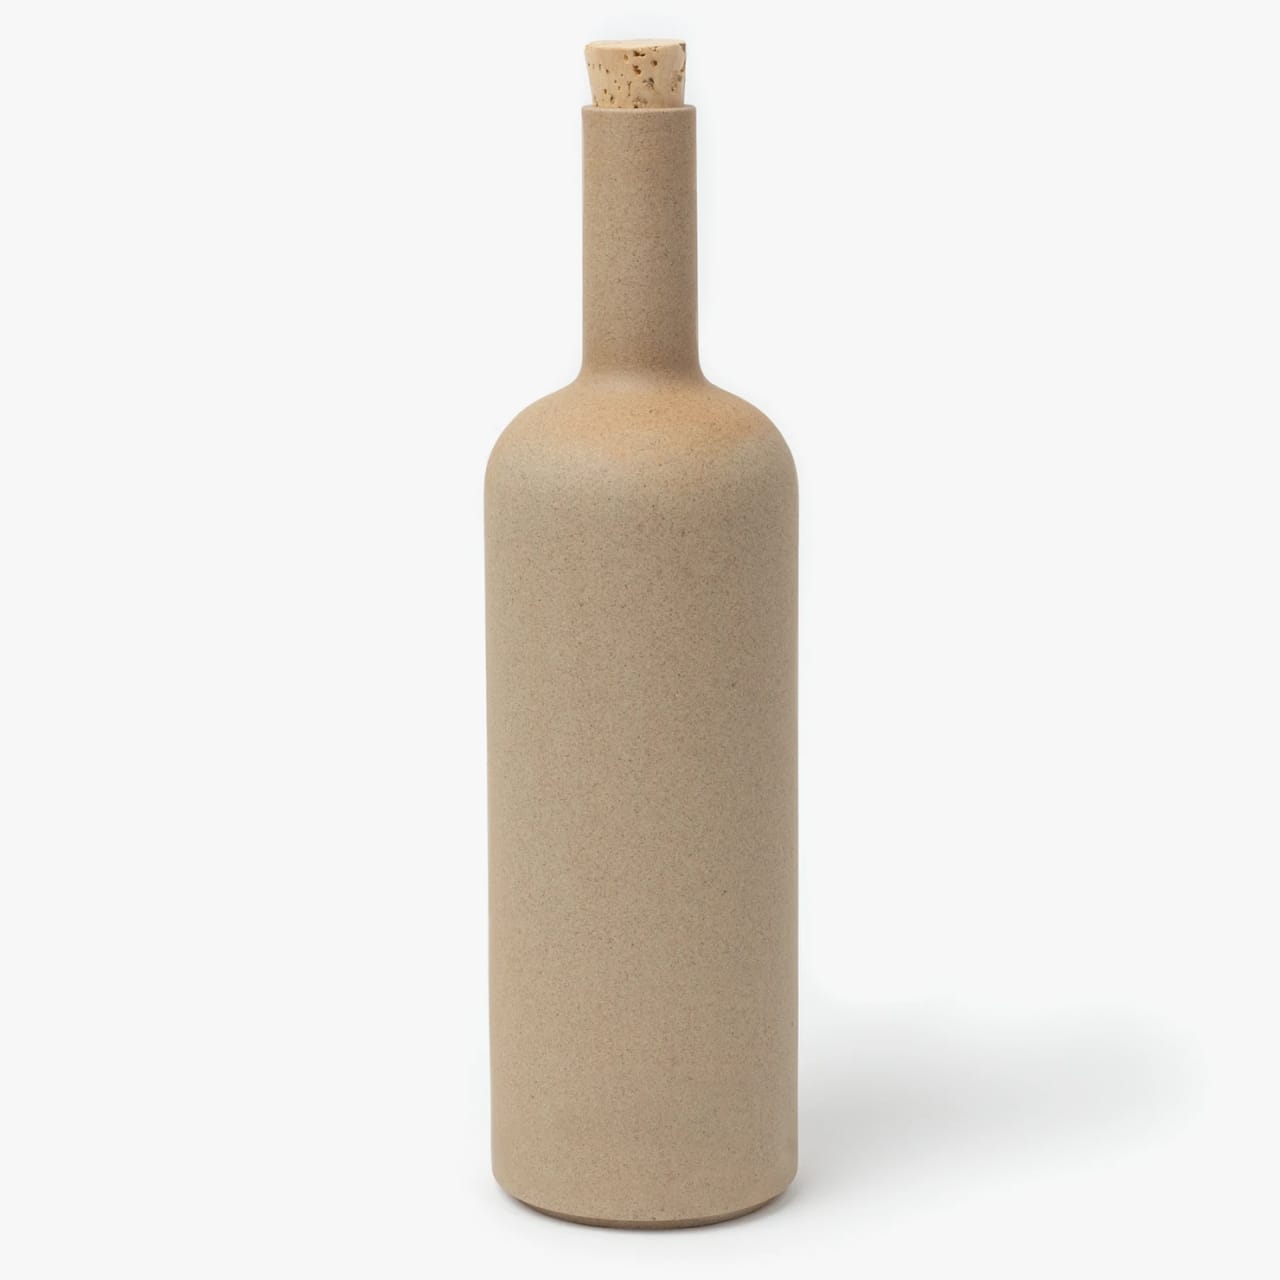 Tall slender porcelain bottle with natural clay textured body and cork stopper.